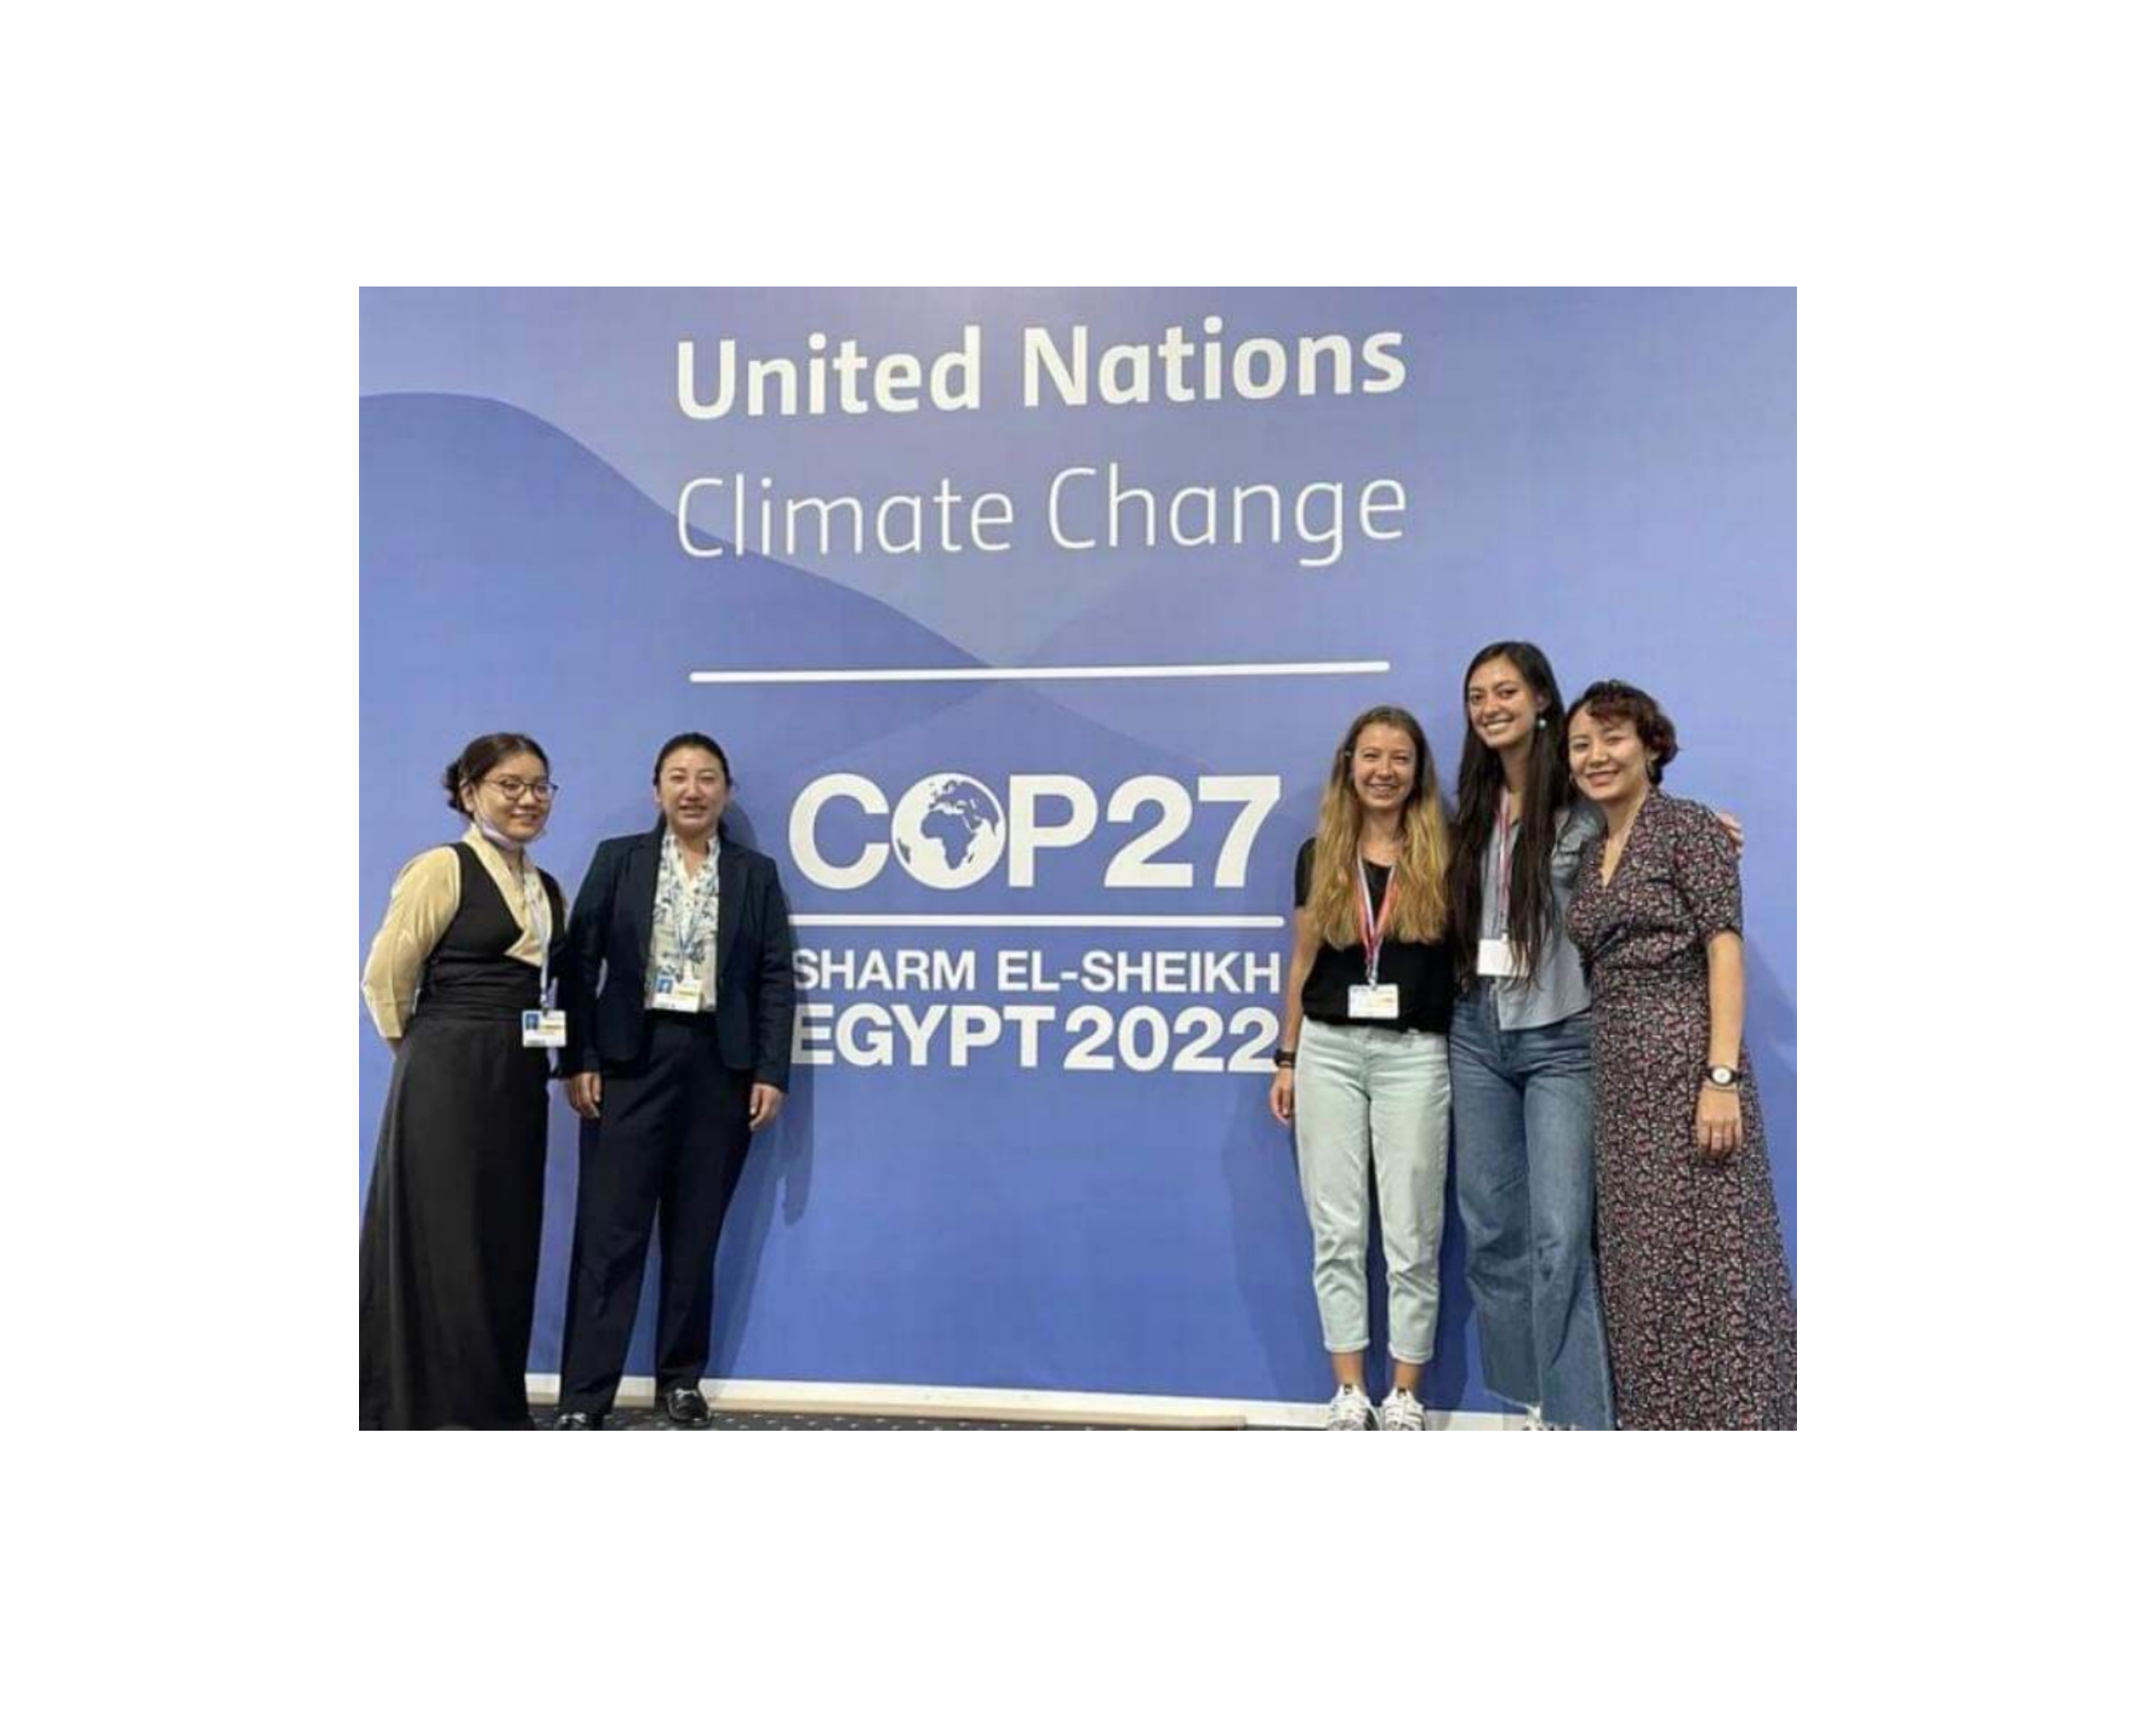 United Nations COP27 in 2022